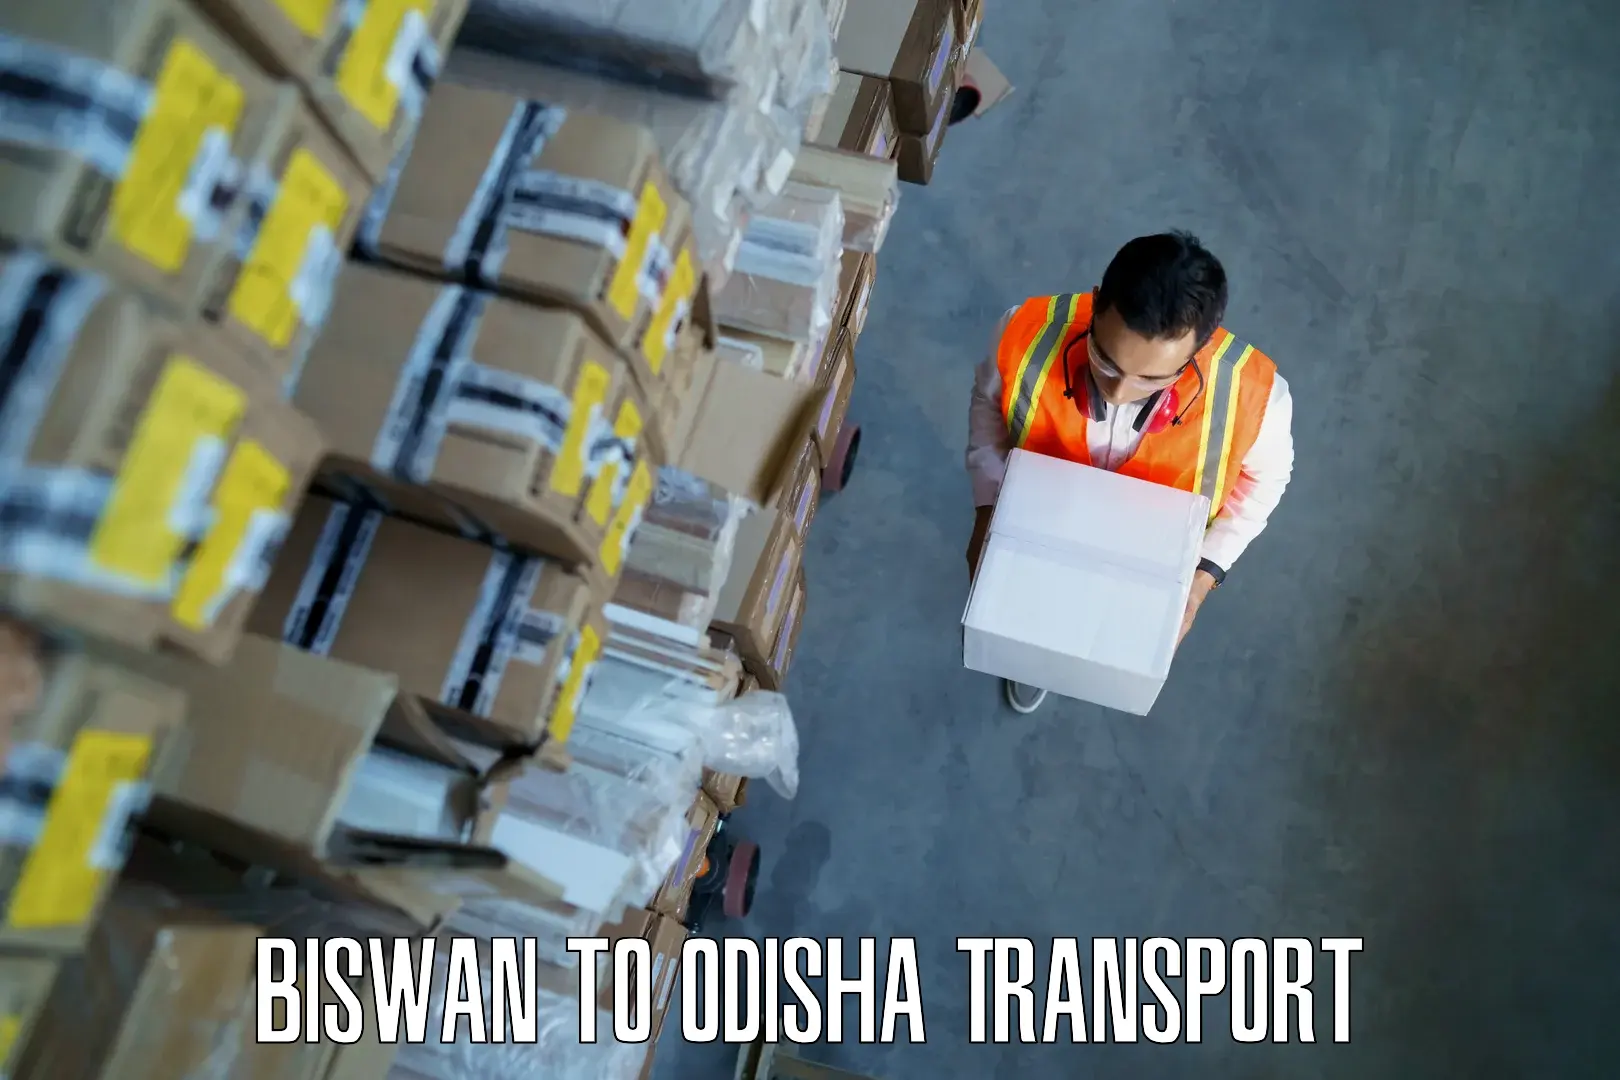 Vehicle transport services in Biswan to Odisha